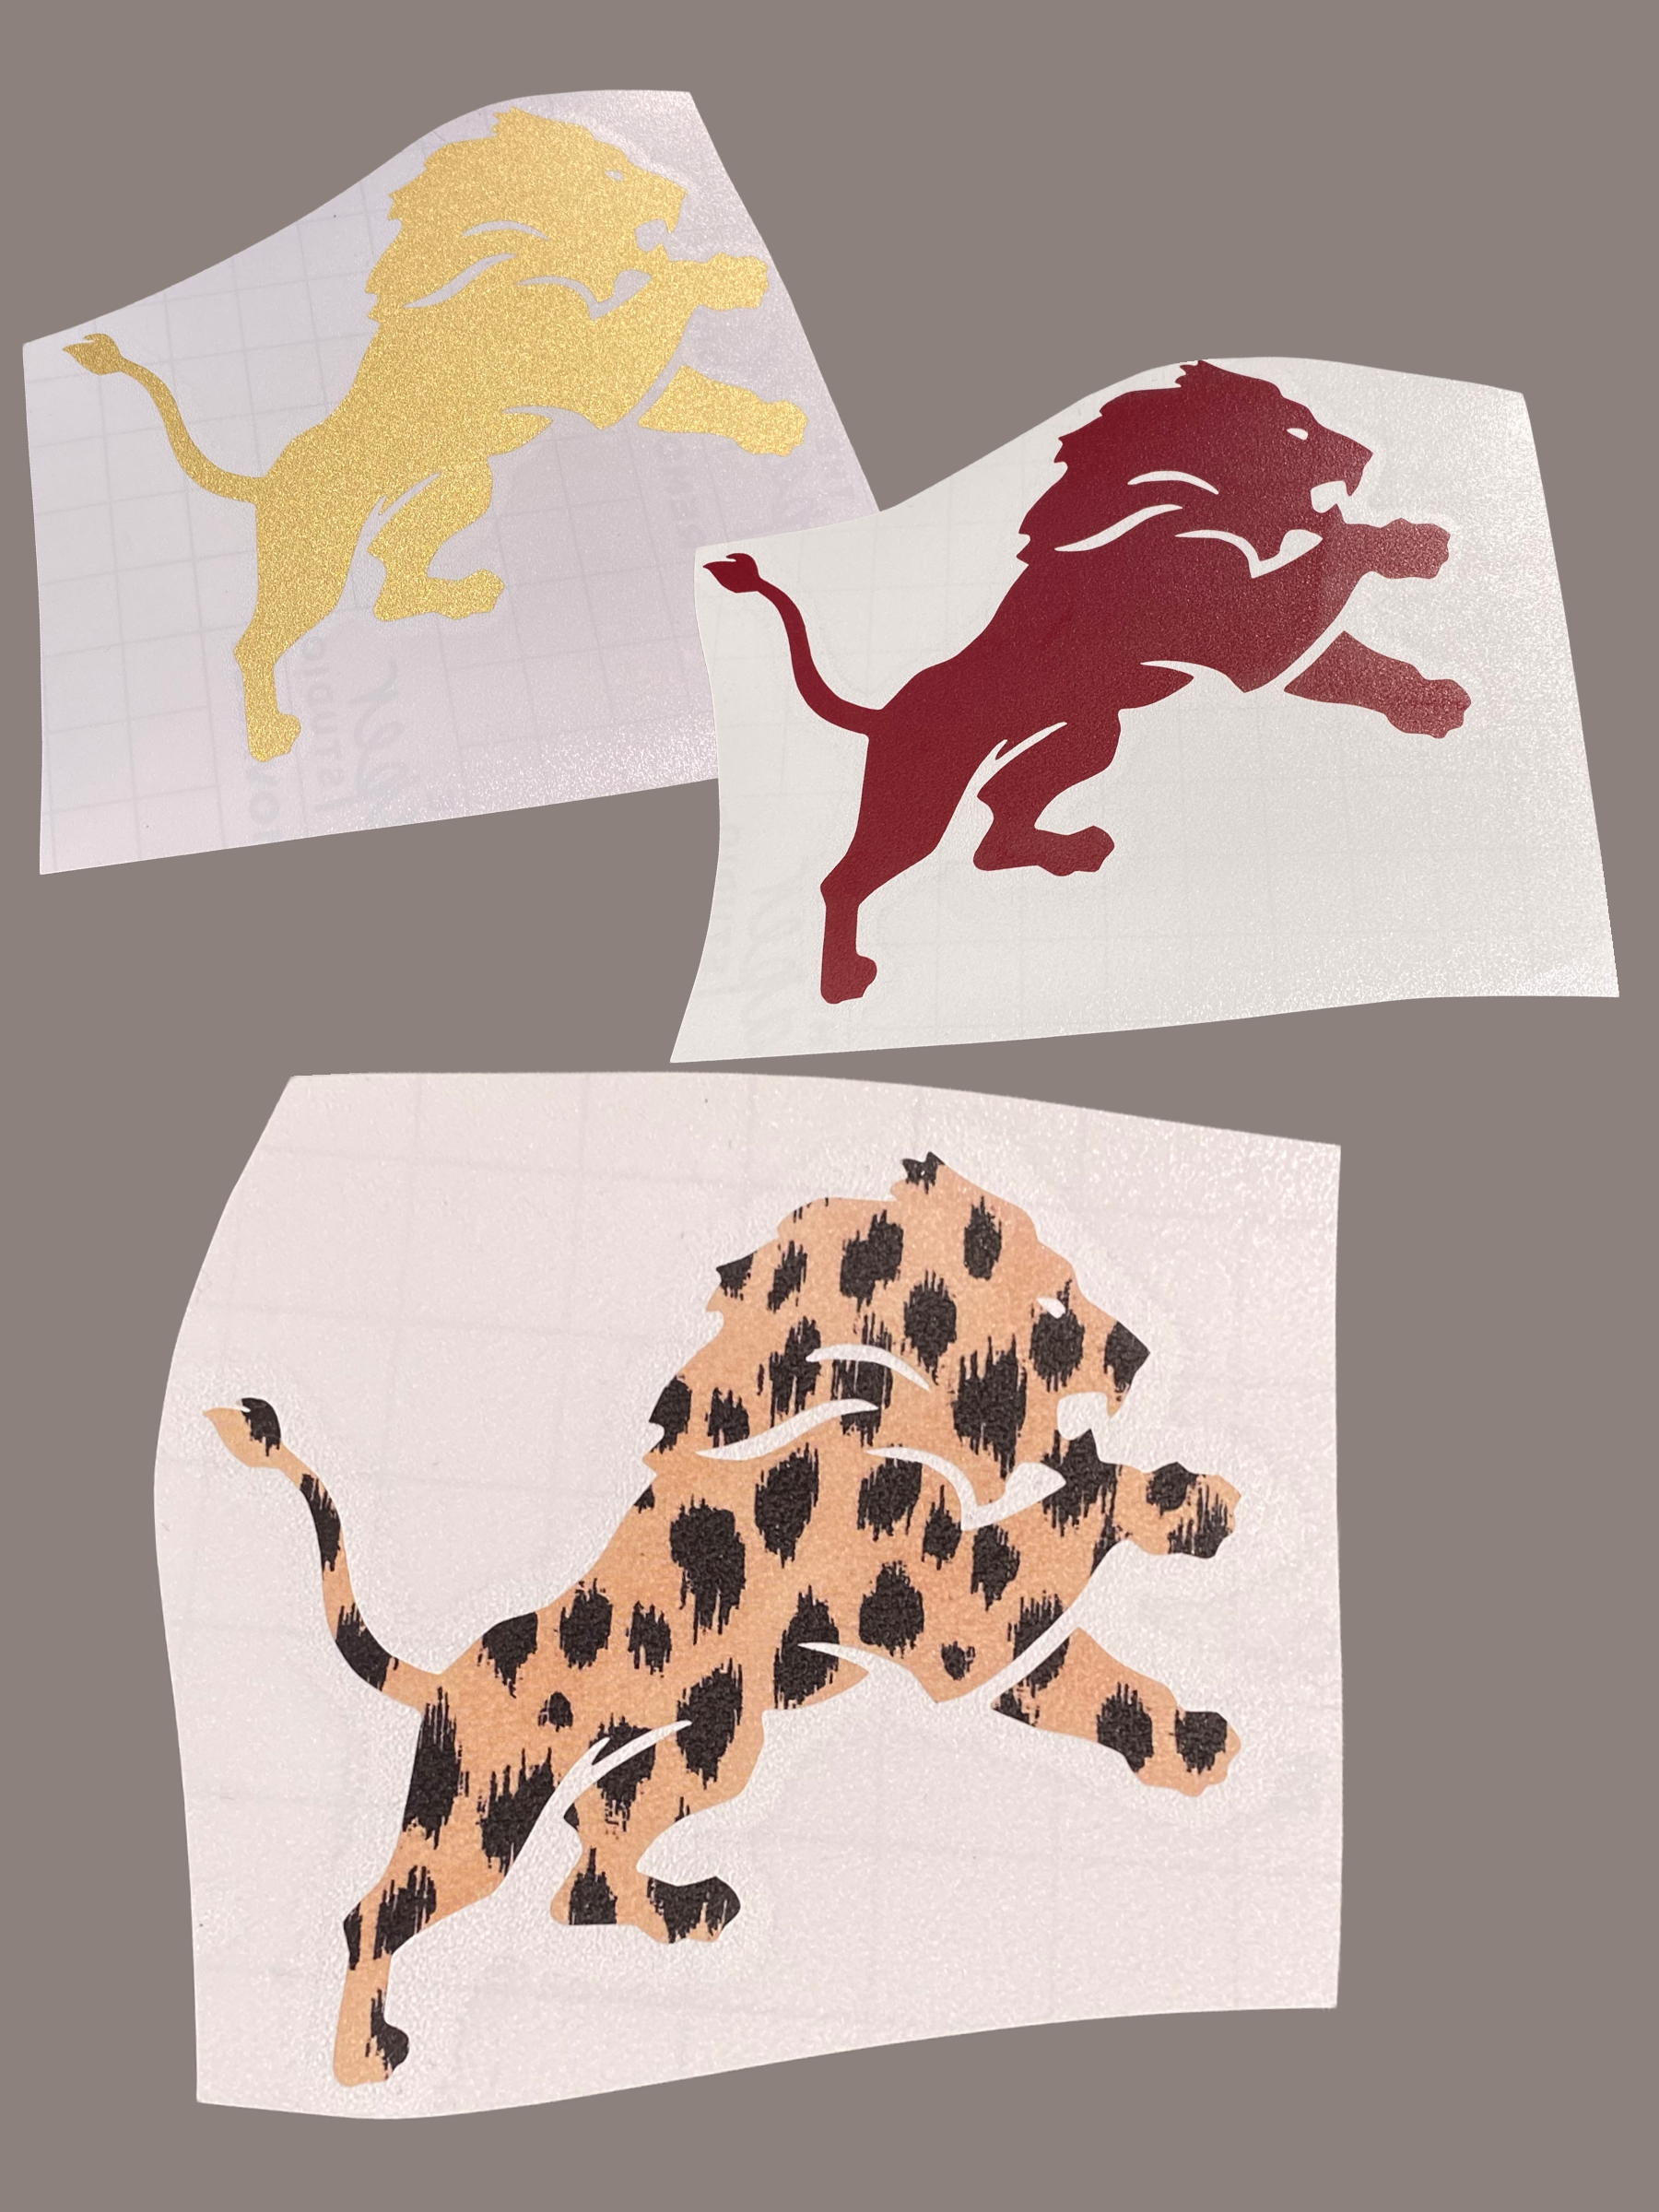 Leaping Lion decal 3"